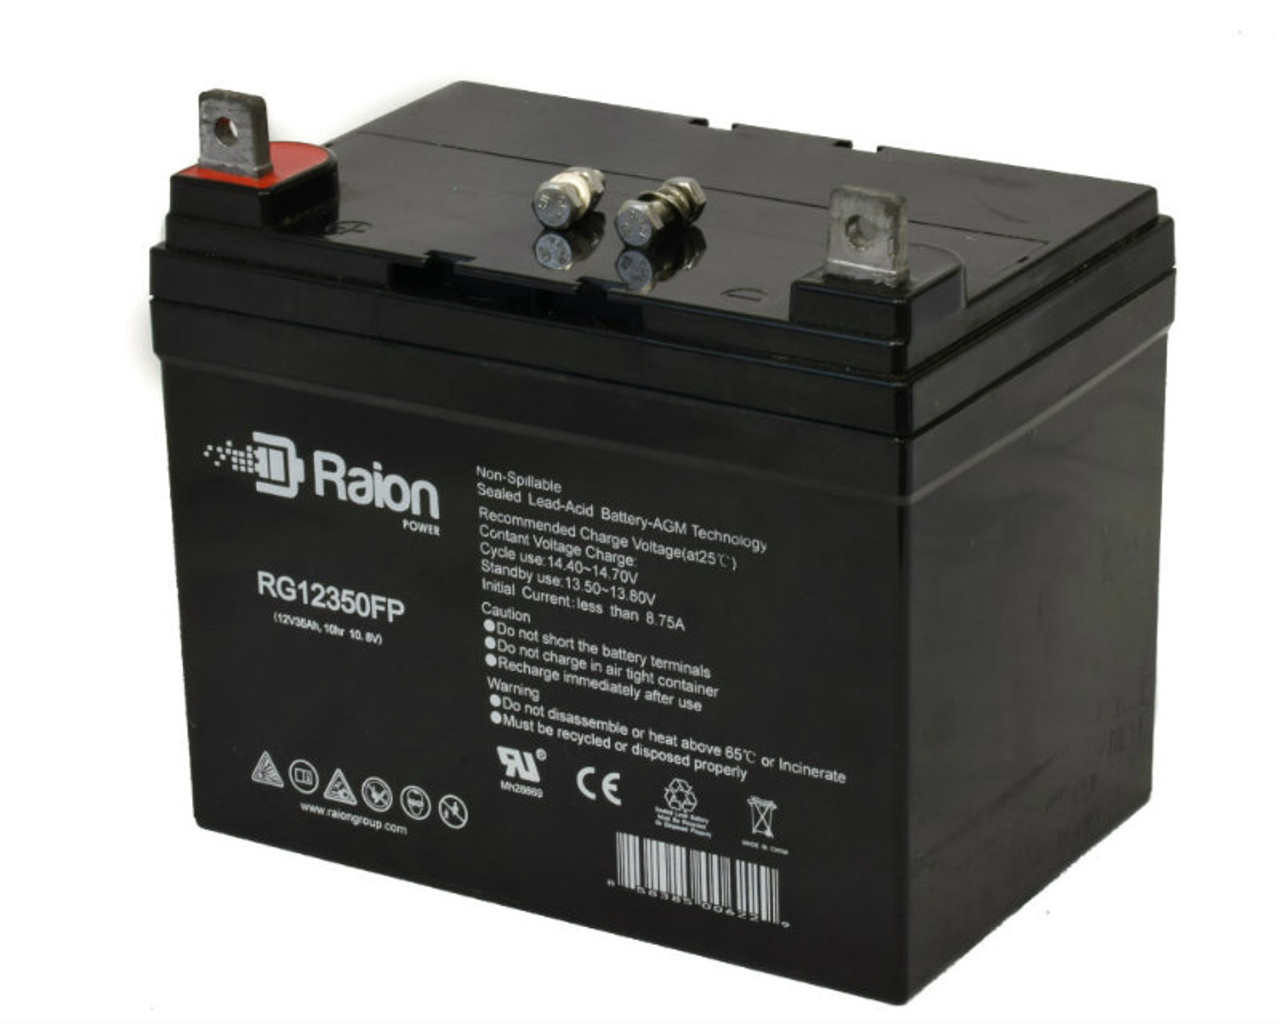 Raion Power Replacement 12V 35Ah RG12350FP Mobility Scooter Battery for Everest & Jennings Wheelchairs Sabre (ES - ES-GT)